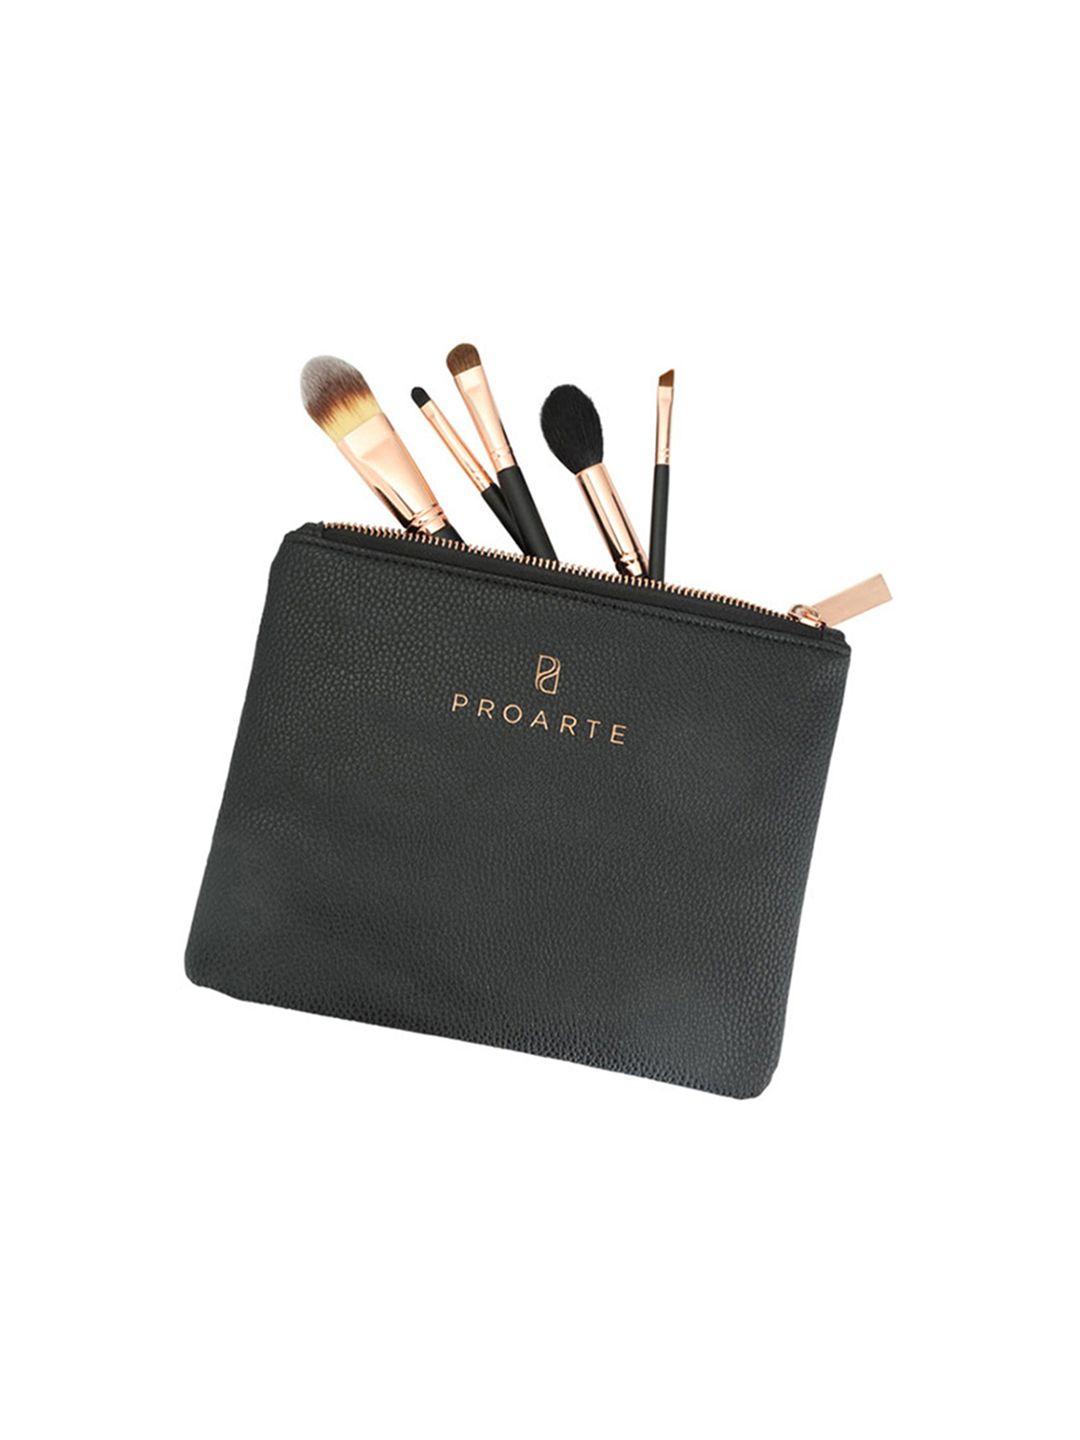 proarte set of 12 studio brushes with pouch